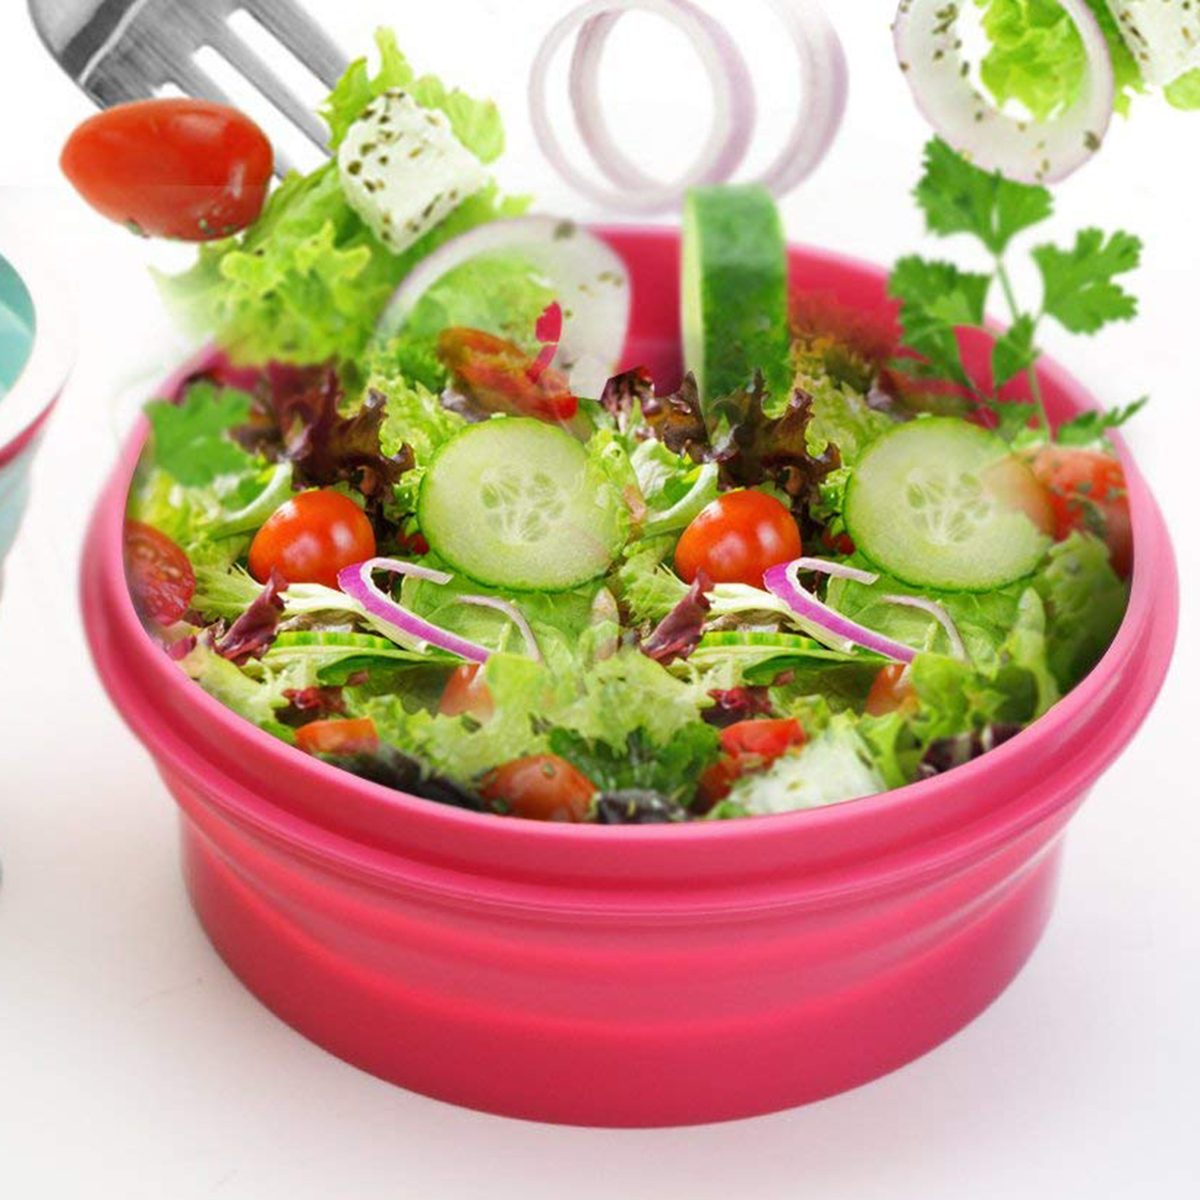 https://www.tasteofhome.com/wp-content/uploads/2020/03/Our-Favorite-Salad-Containers.jpg